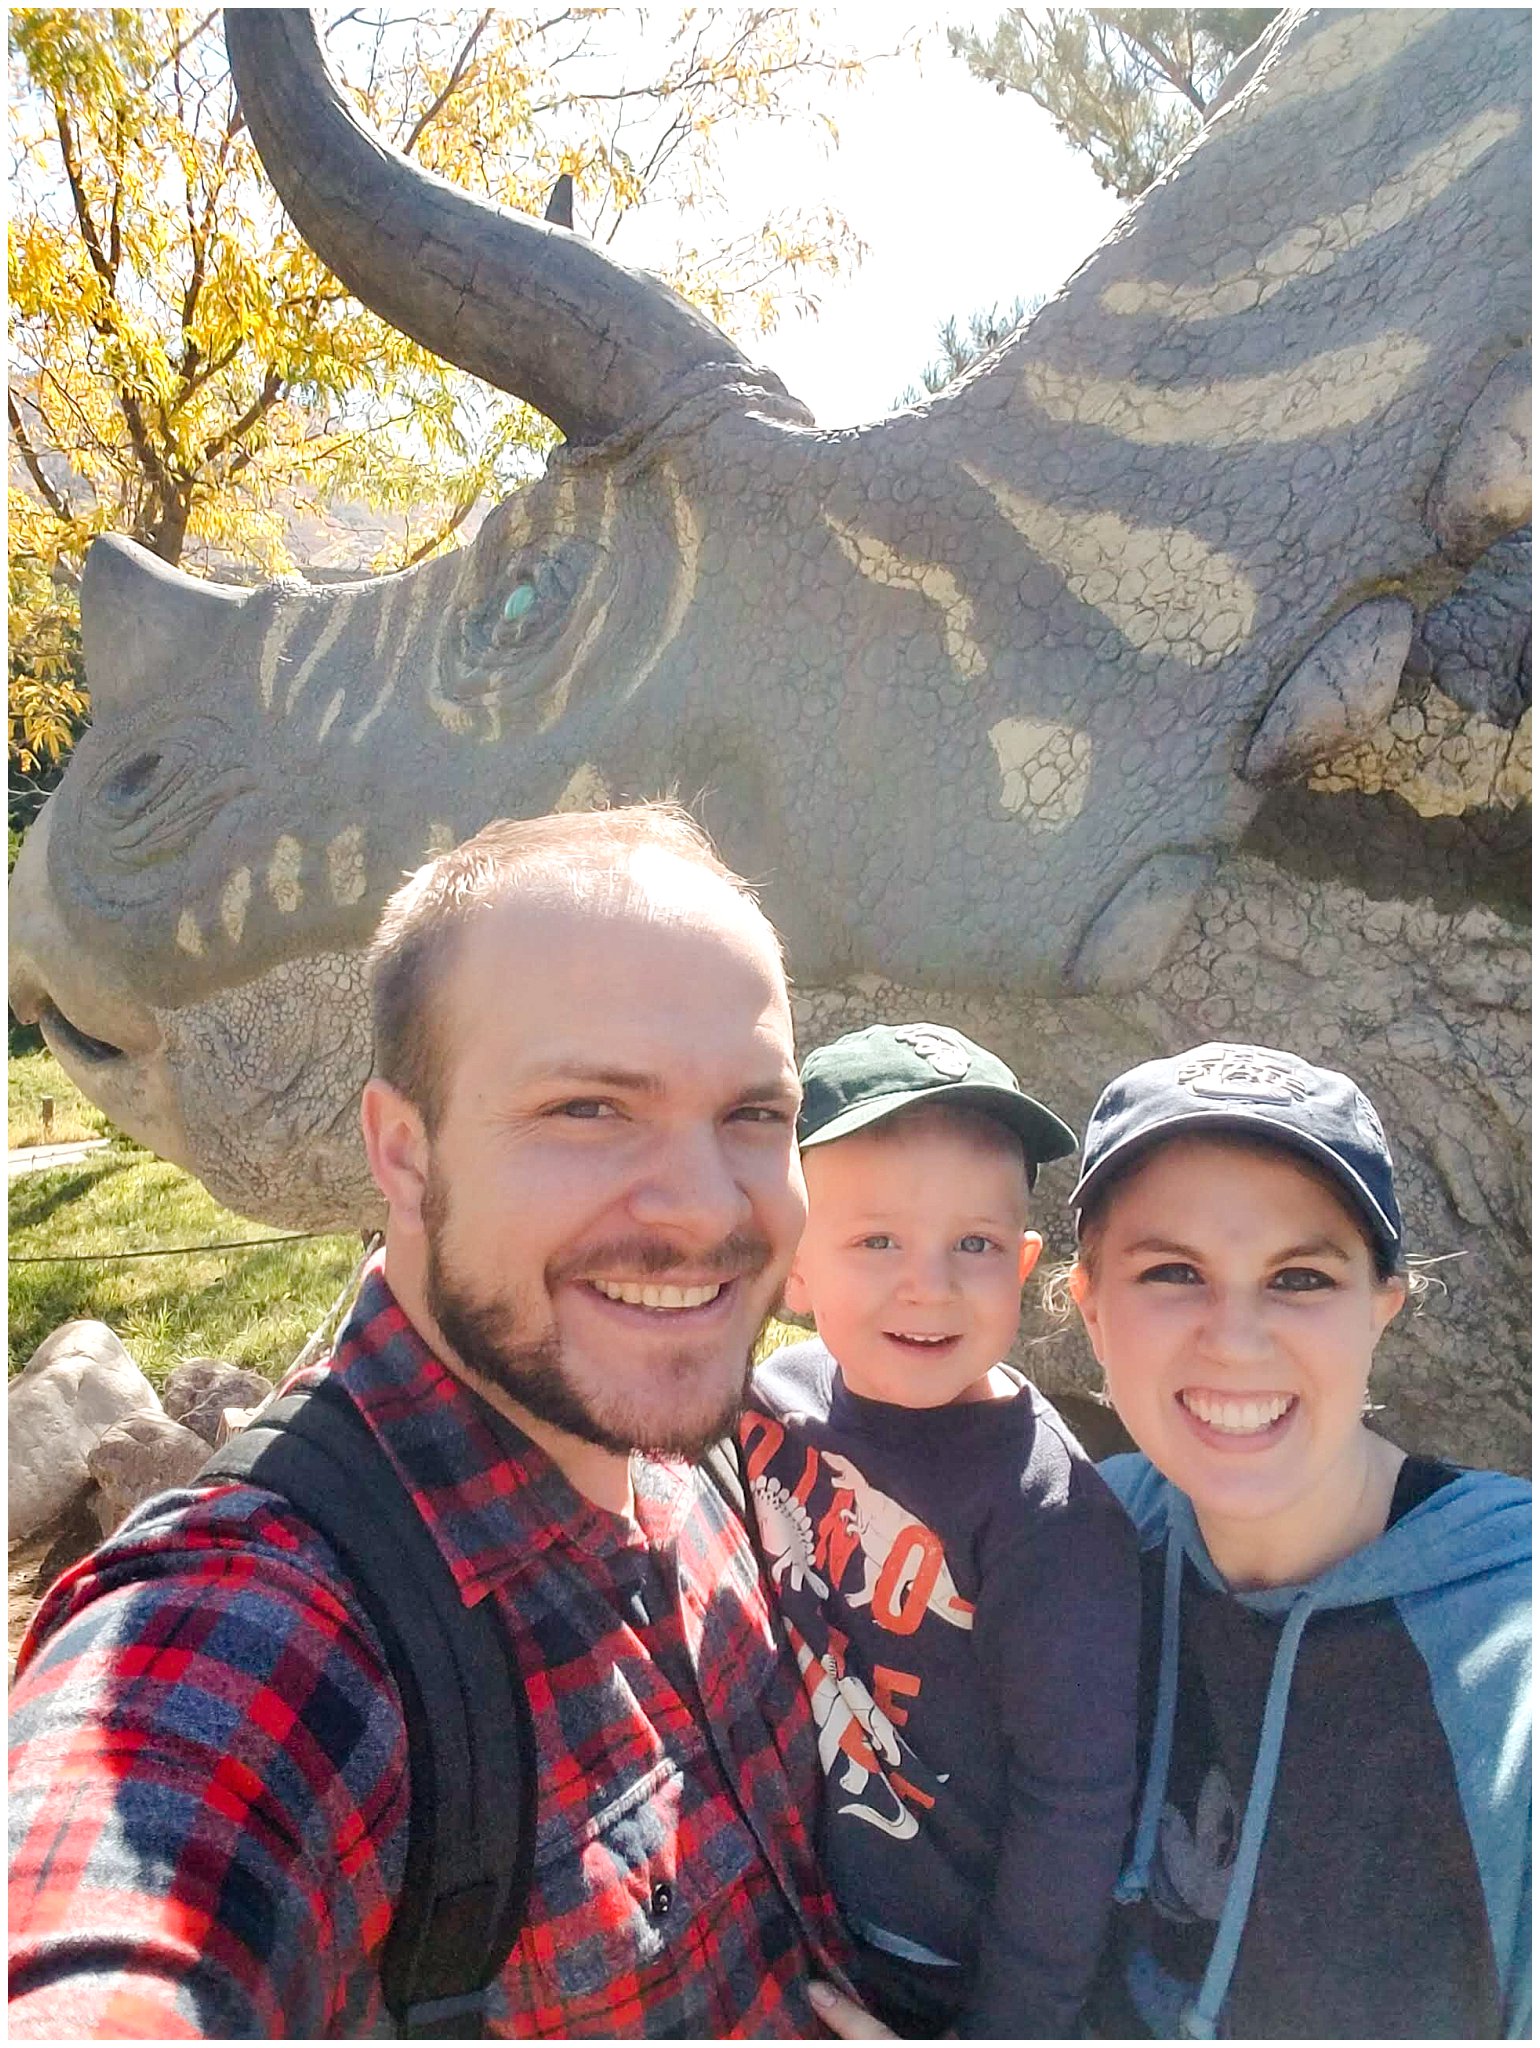 Our family at dinosaur park in front of the Triceratops | Fun Friday - Dinosaur Park | Ogden, Utah | Jessie and Dallin